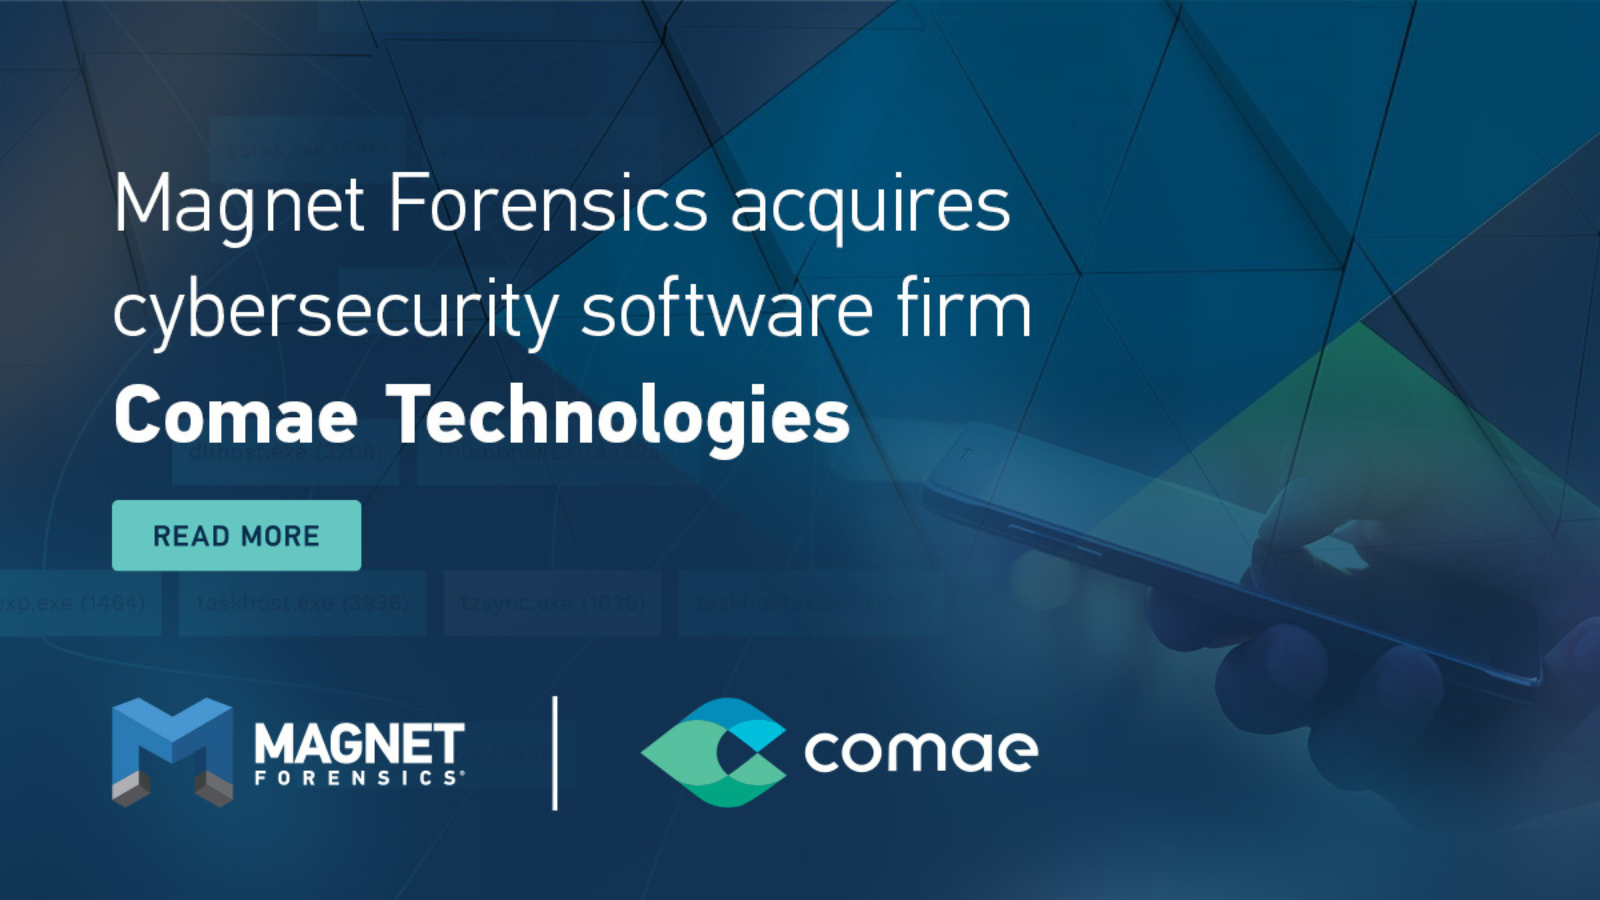 Magnet Forensics Acquires Cybersecurity Software Firm Comae Technologies